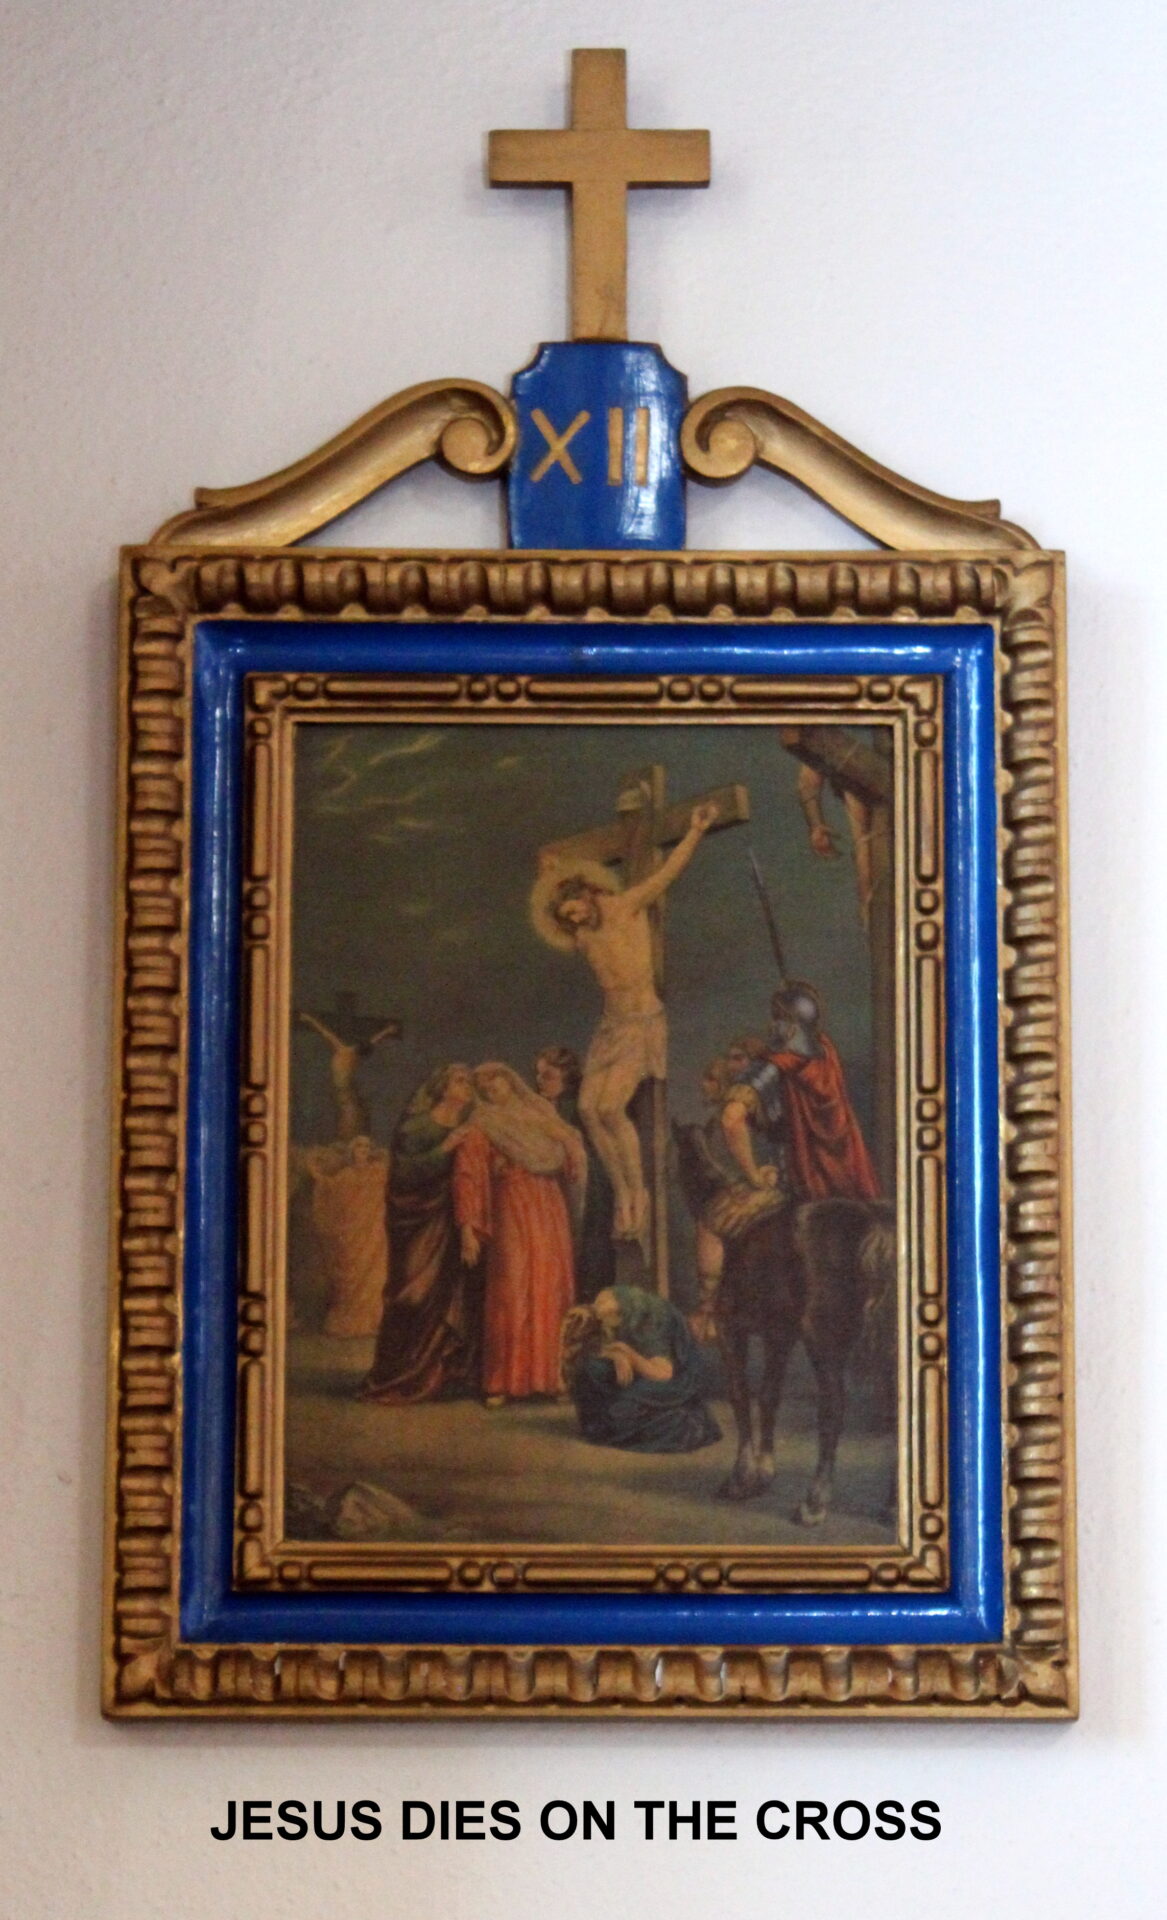 The 12th chapter of the station of the cross